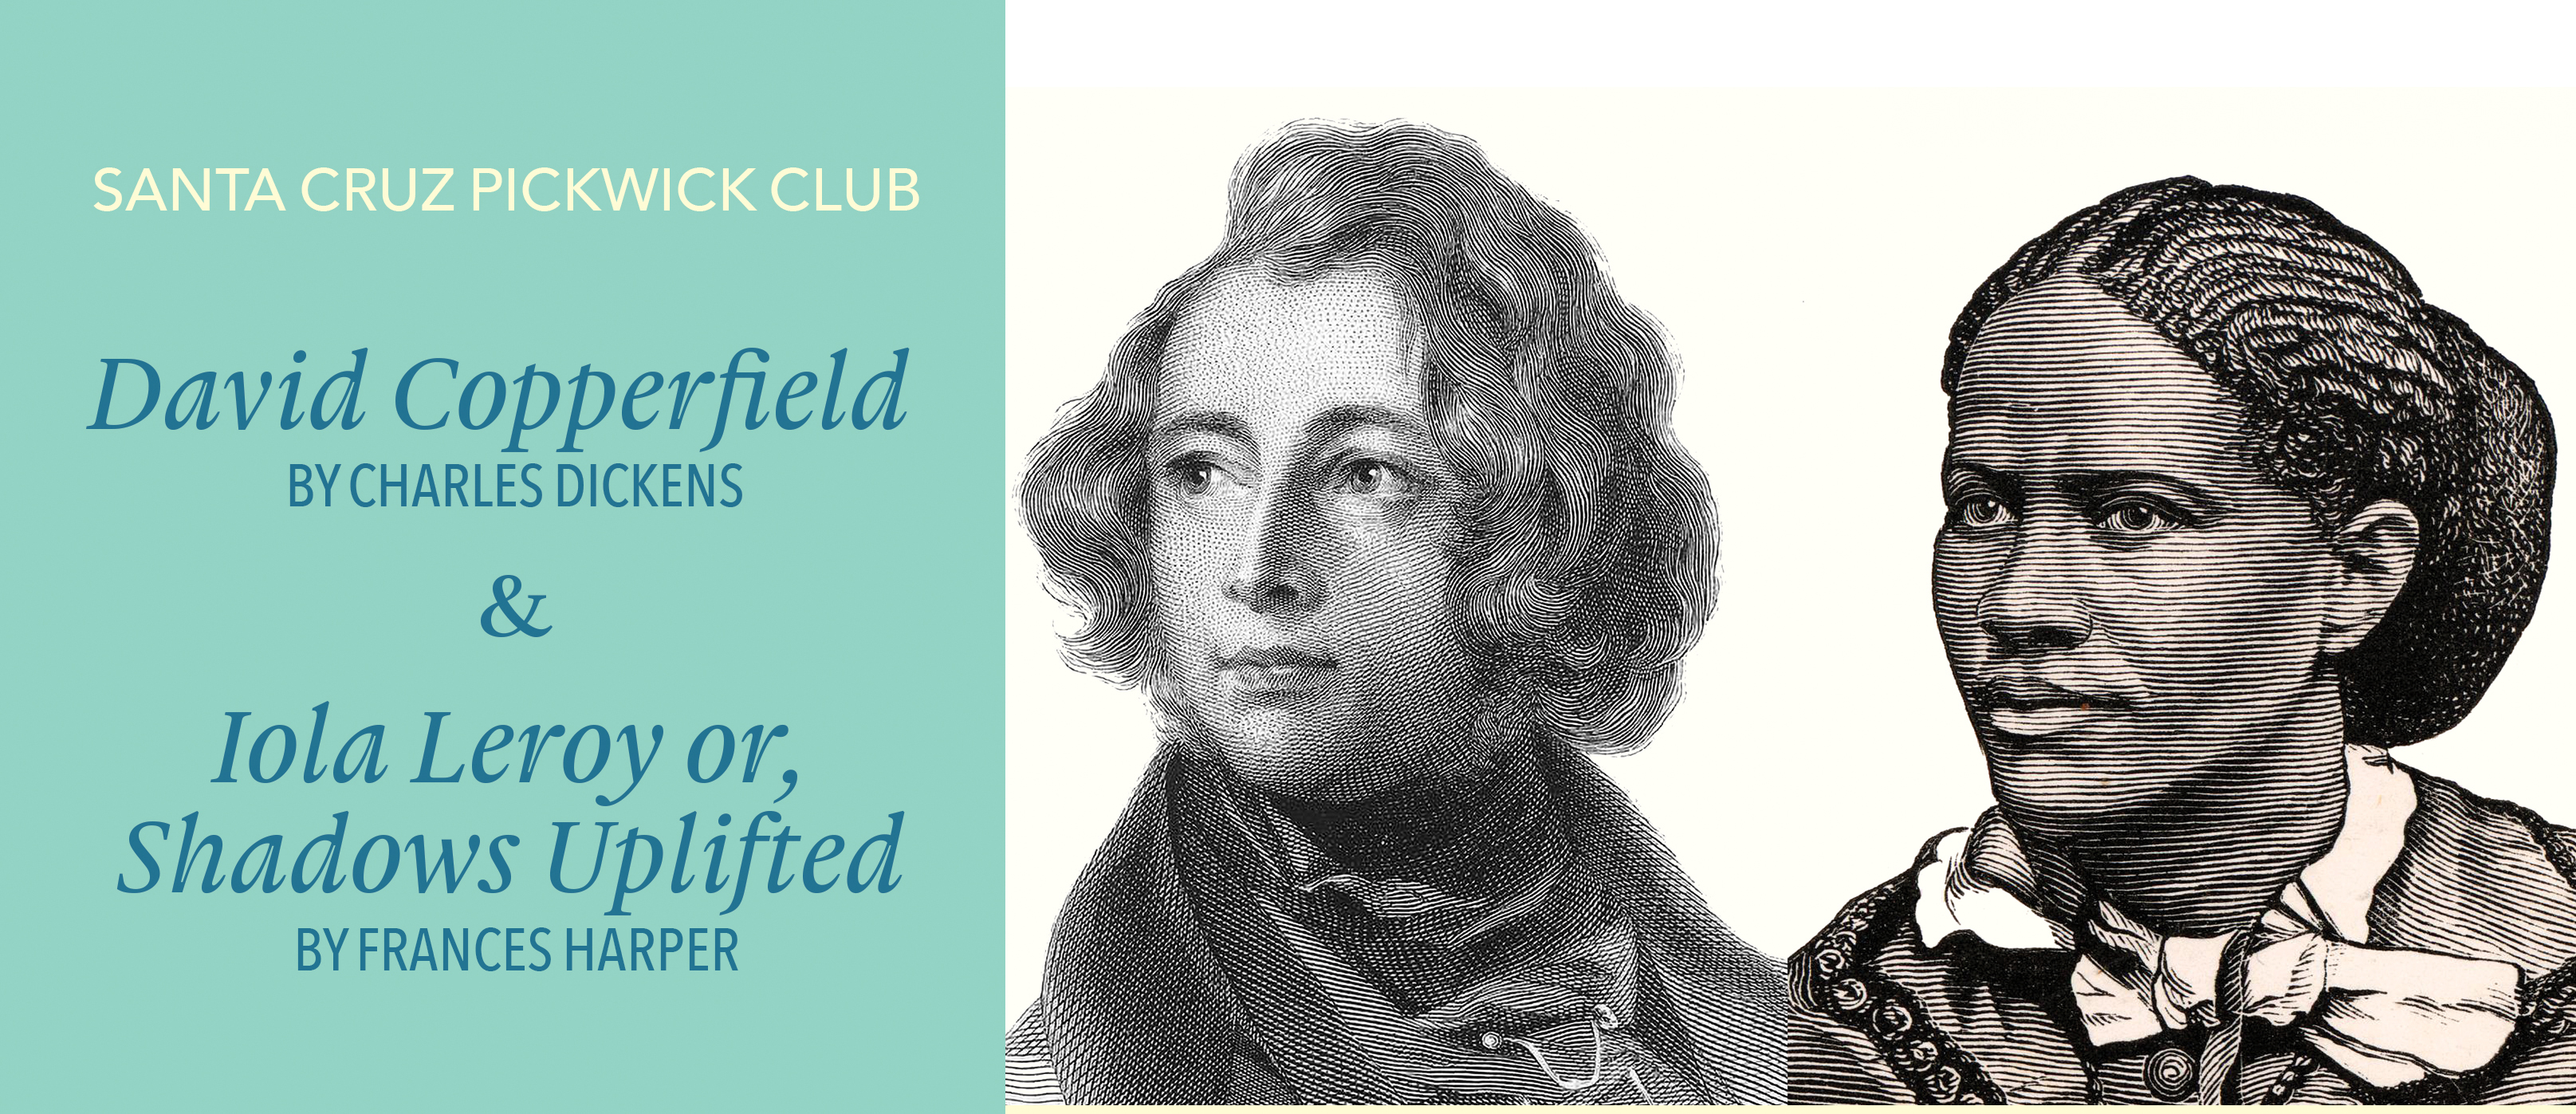 Pickwick Club banner image with portrait of Charles Dickens and Frances Harper